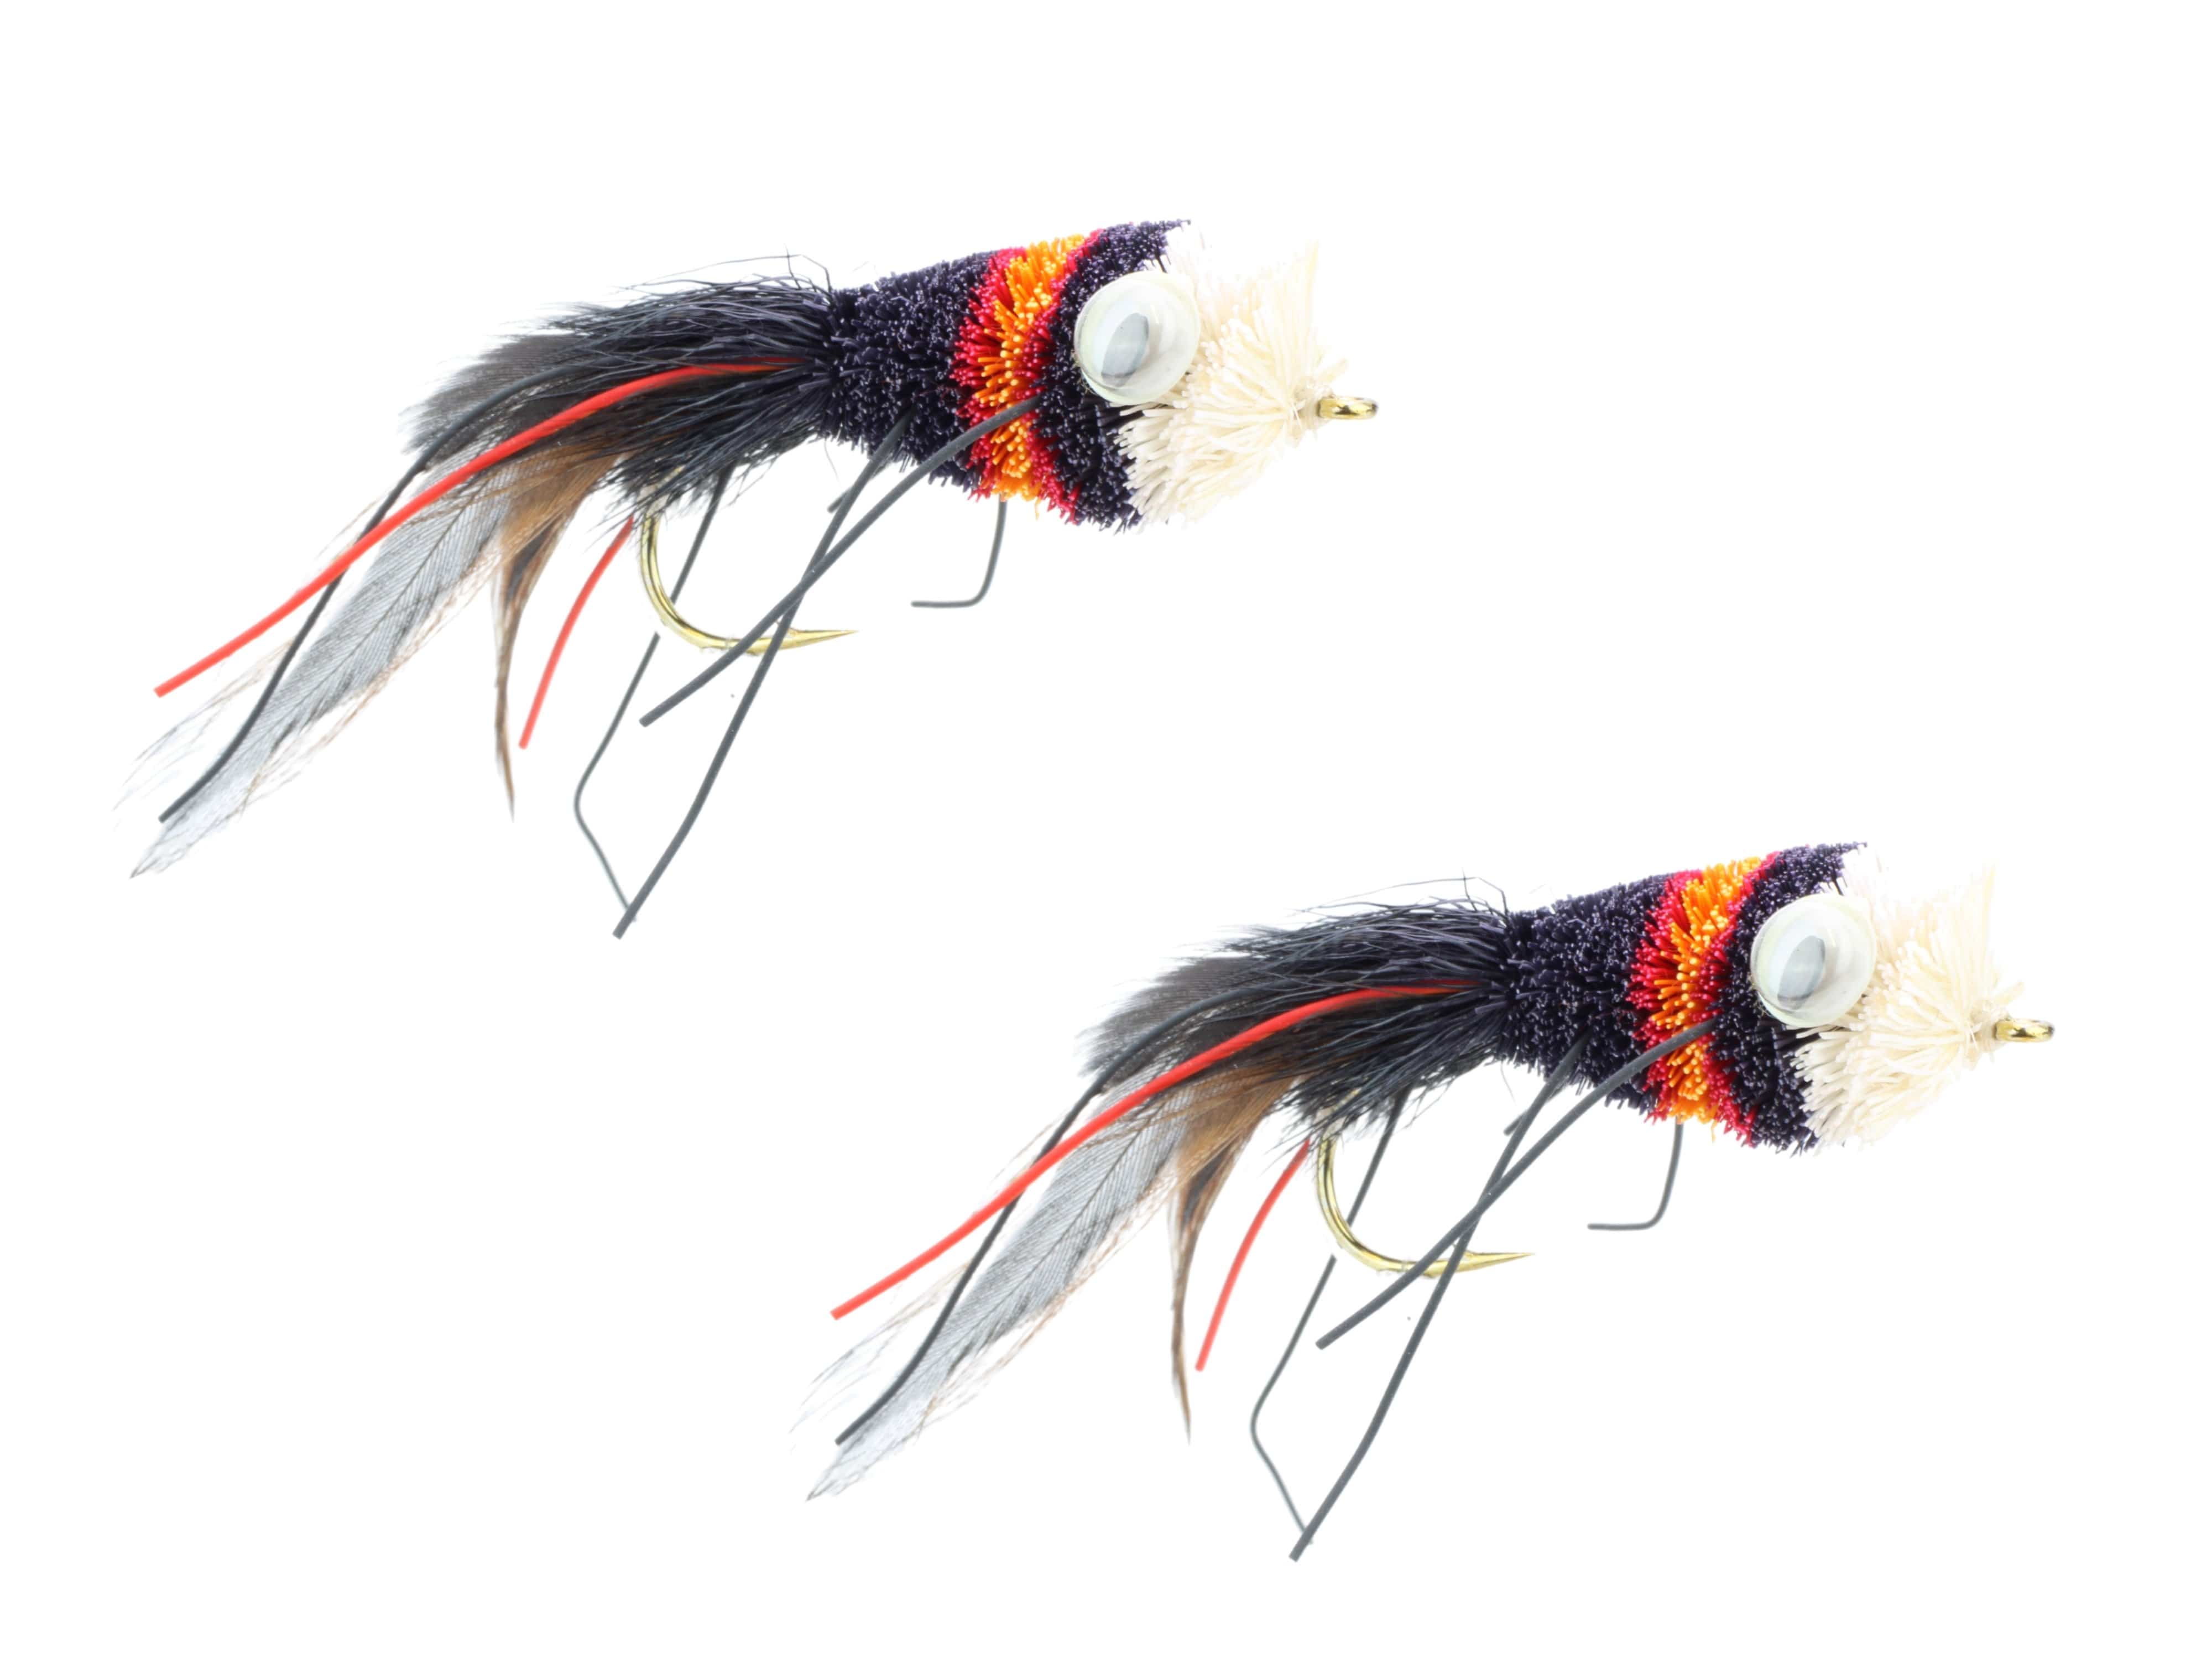 Wild Water Fly Fishing Black, Red and Orange Deer Hair Bass Bug, size 2, qty. 2